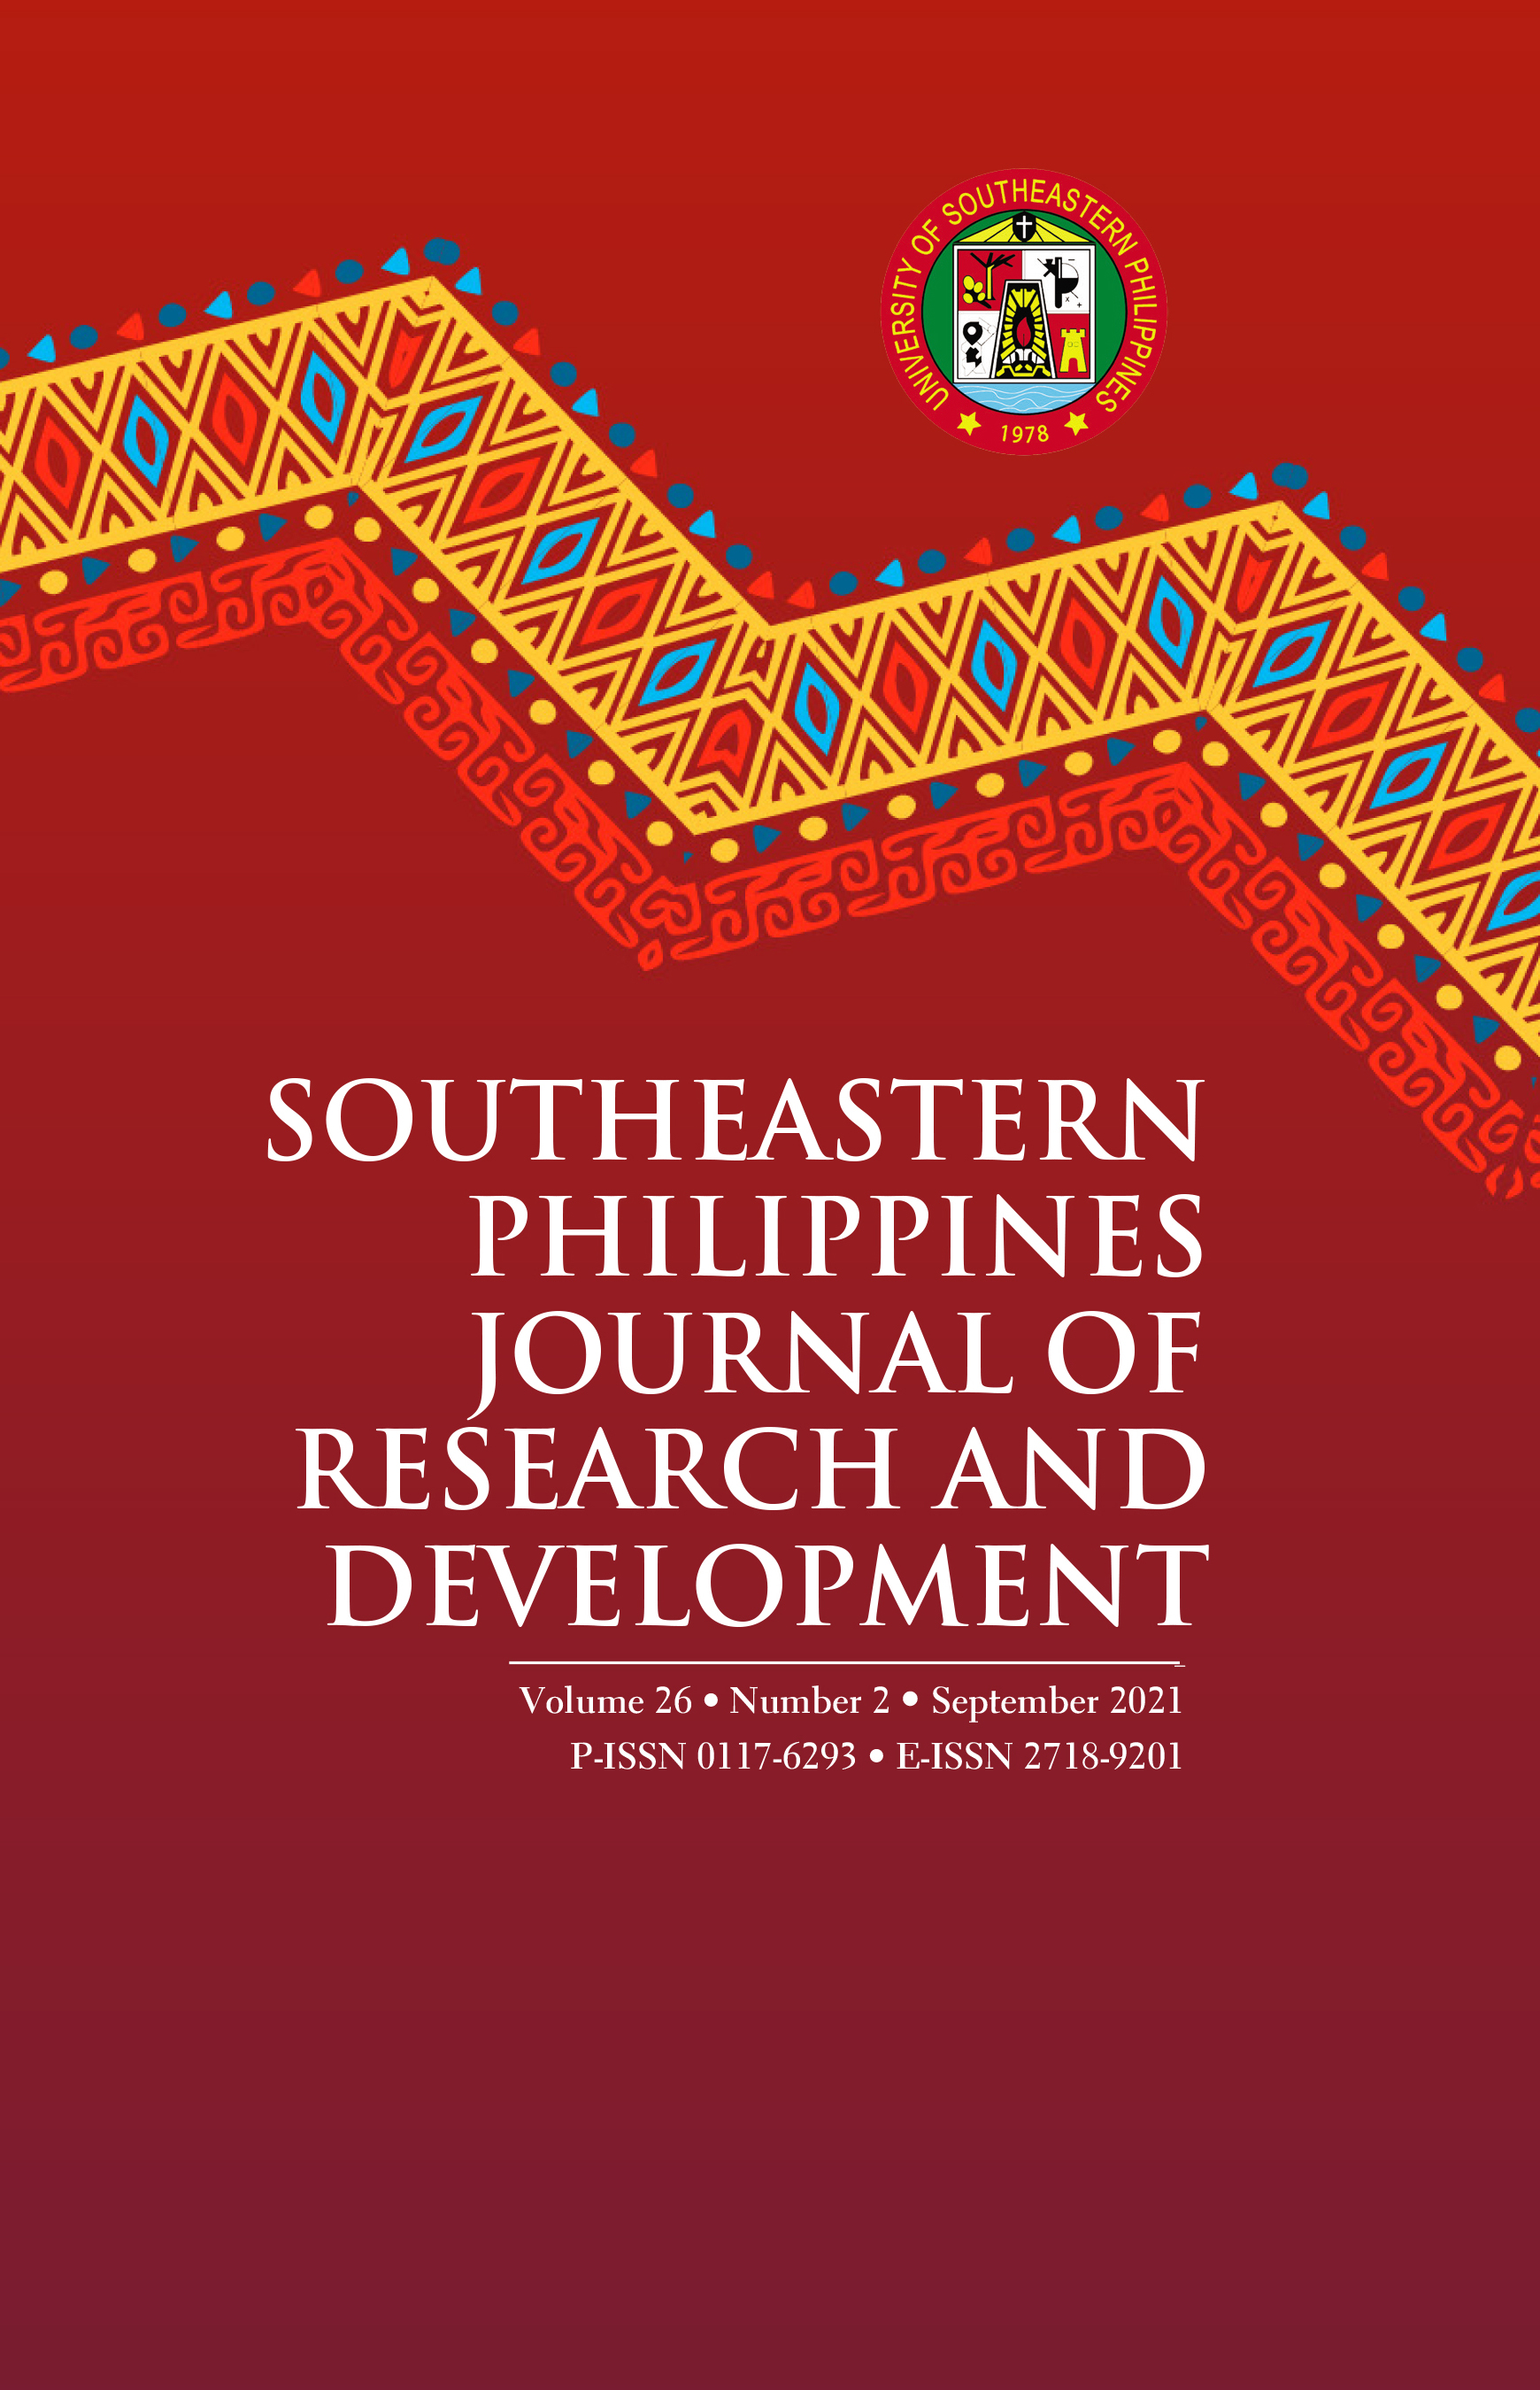 SPJRD Southeastern Philippines Journal of Research and Development Volume 26, Number 1 March 2021 P-ISSN 0117-6293 E-ISSN 2718-9201